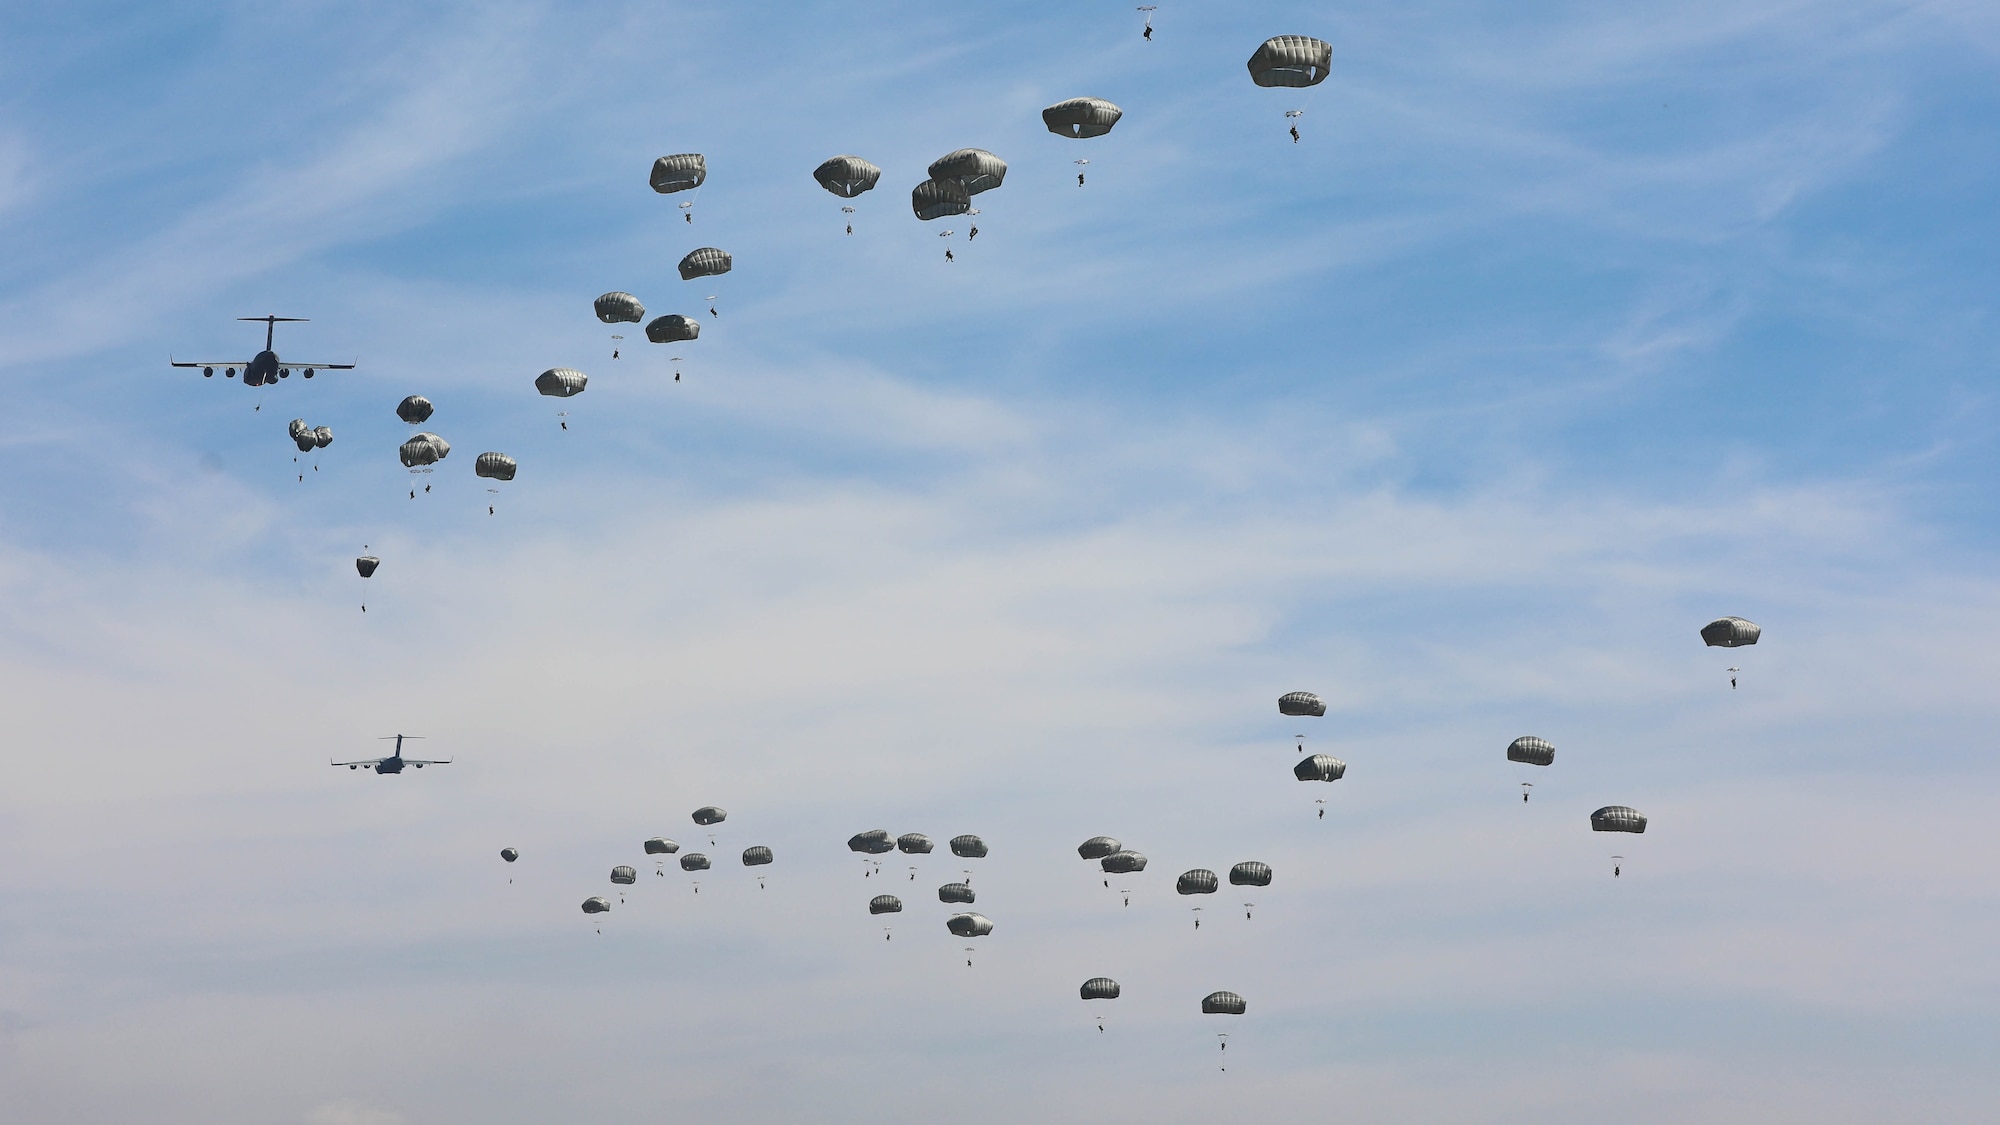 Soldiers parachute out of an C-17 Globemaster III aircraft during an training exercise.